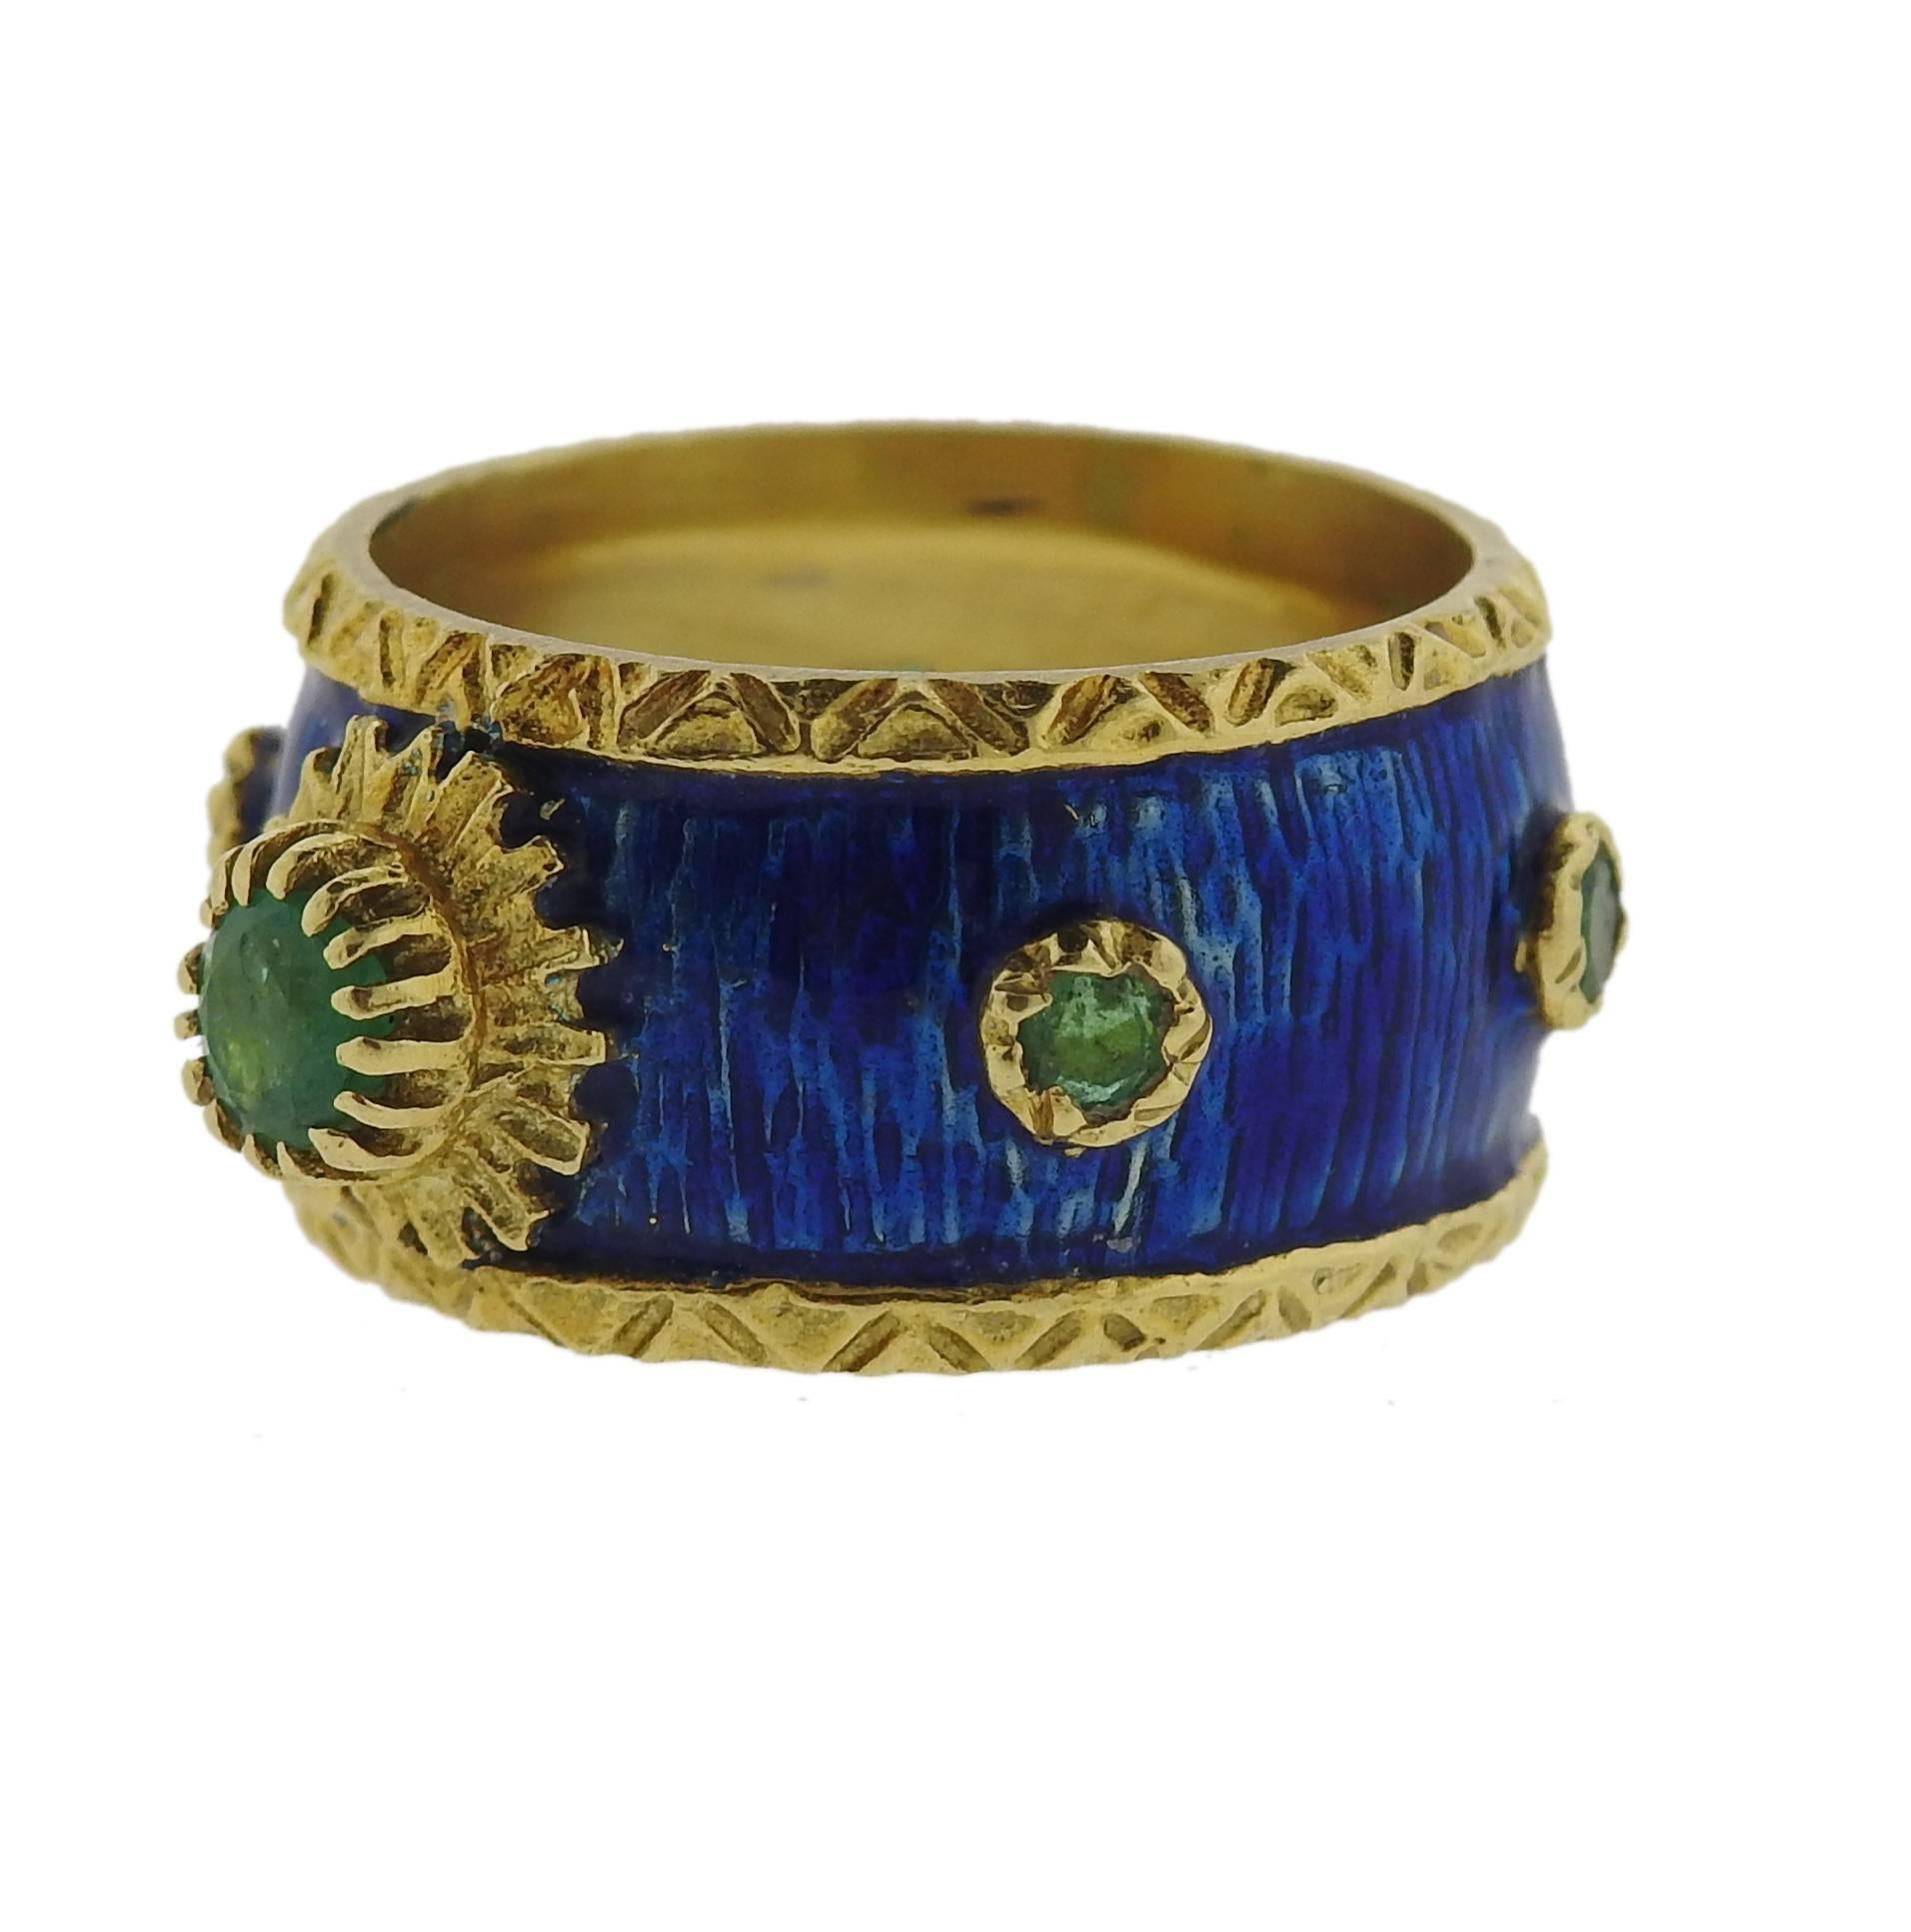 An 18k yellow gold band ring, crafted by Boris Le Beau, decorated with bright blue enamel and emeralds. Ring is a size 6 and is 10.5mm wide. Marked:  Boris, 18k. Weight - 10 grams 